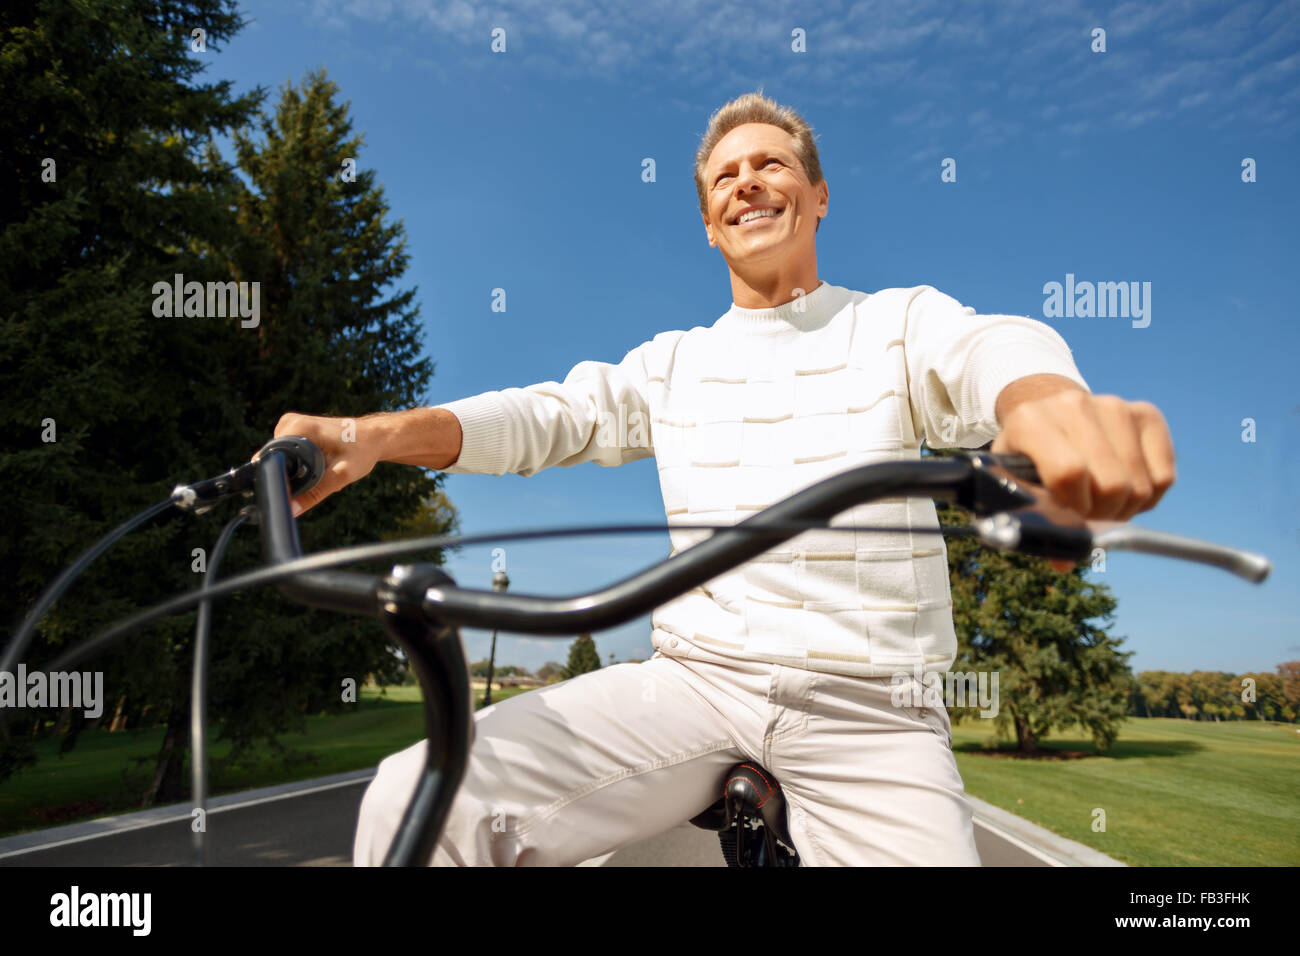 Hot man riding a bicycle Banque D'Images